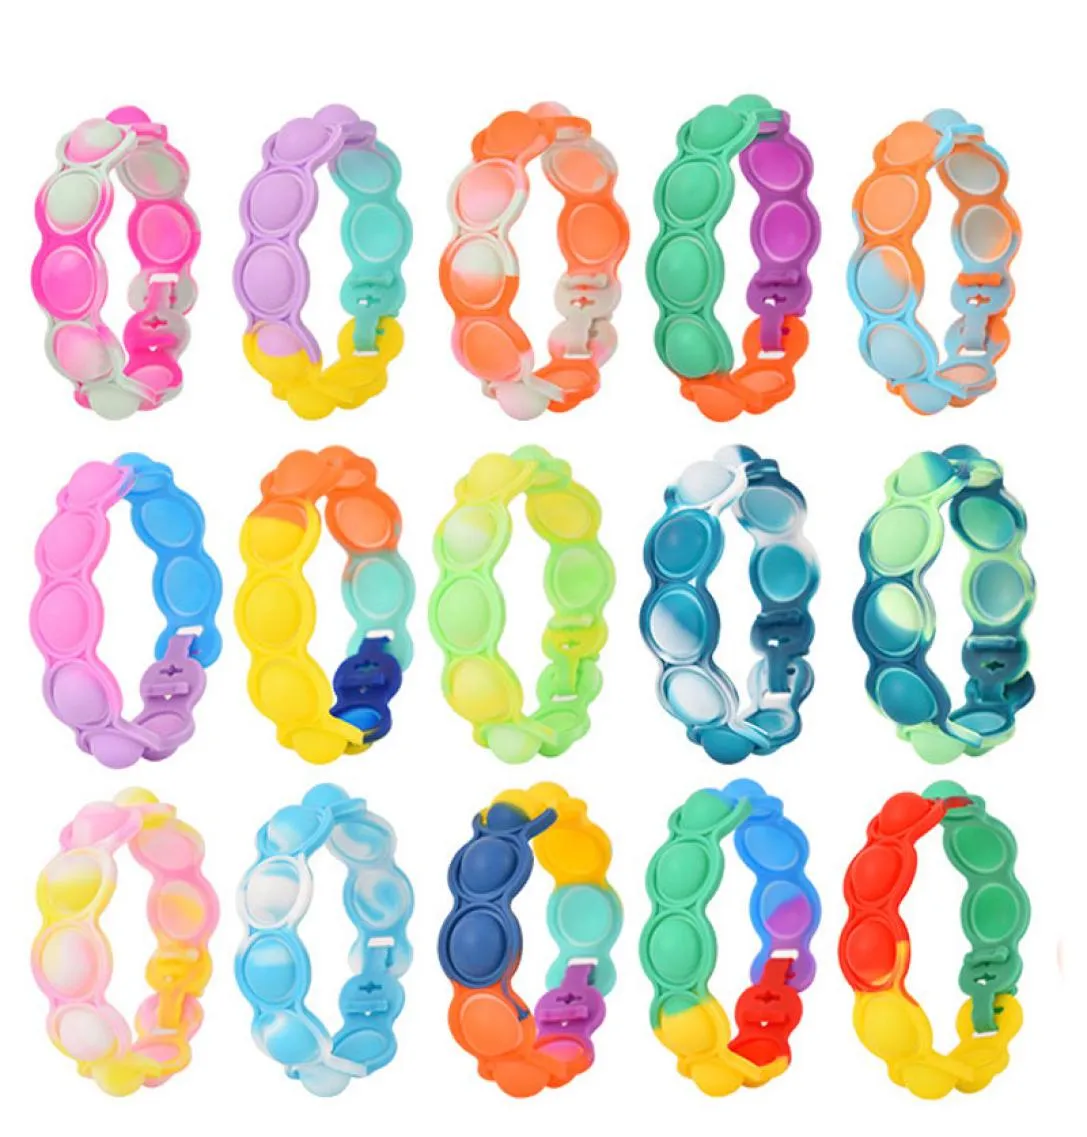 Toys Bracelet Push Bubble Squeeze Silicone Anti Stress Reliever Sensory Squishy Press Gift for Kids Adult anxiety antistress ring9125552